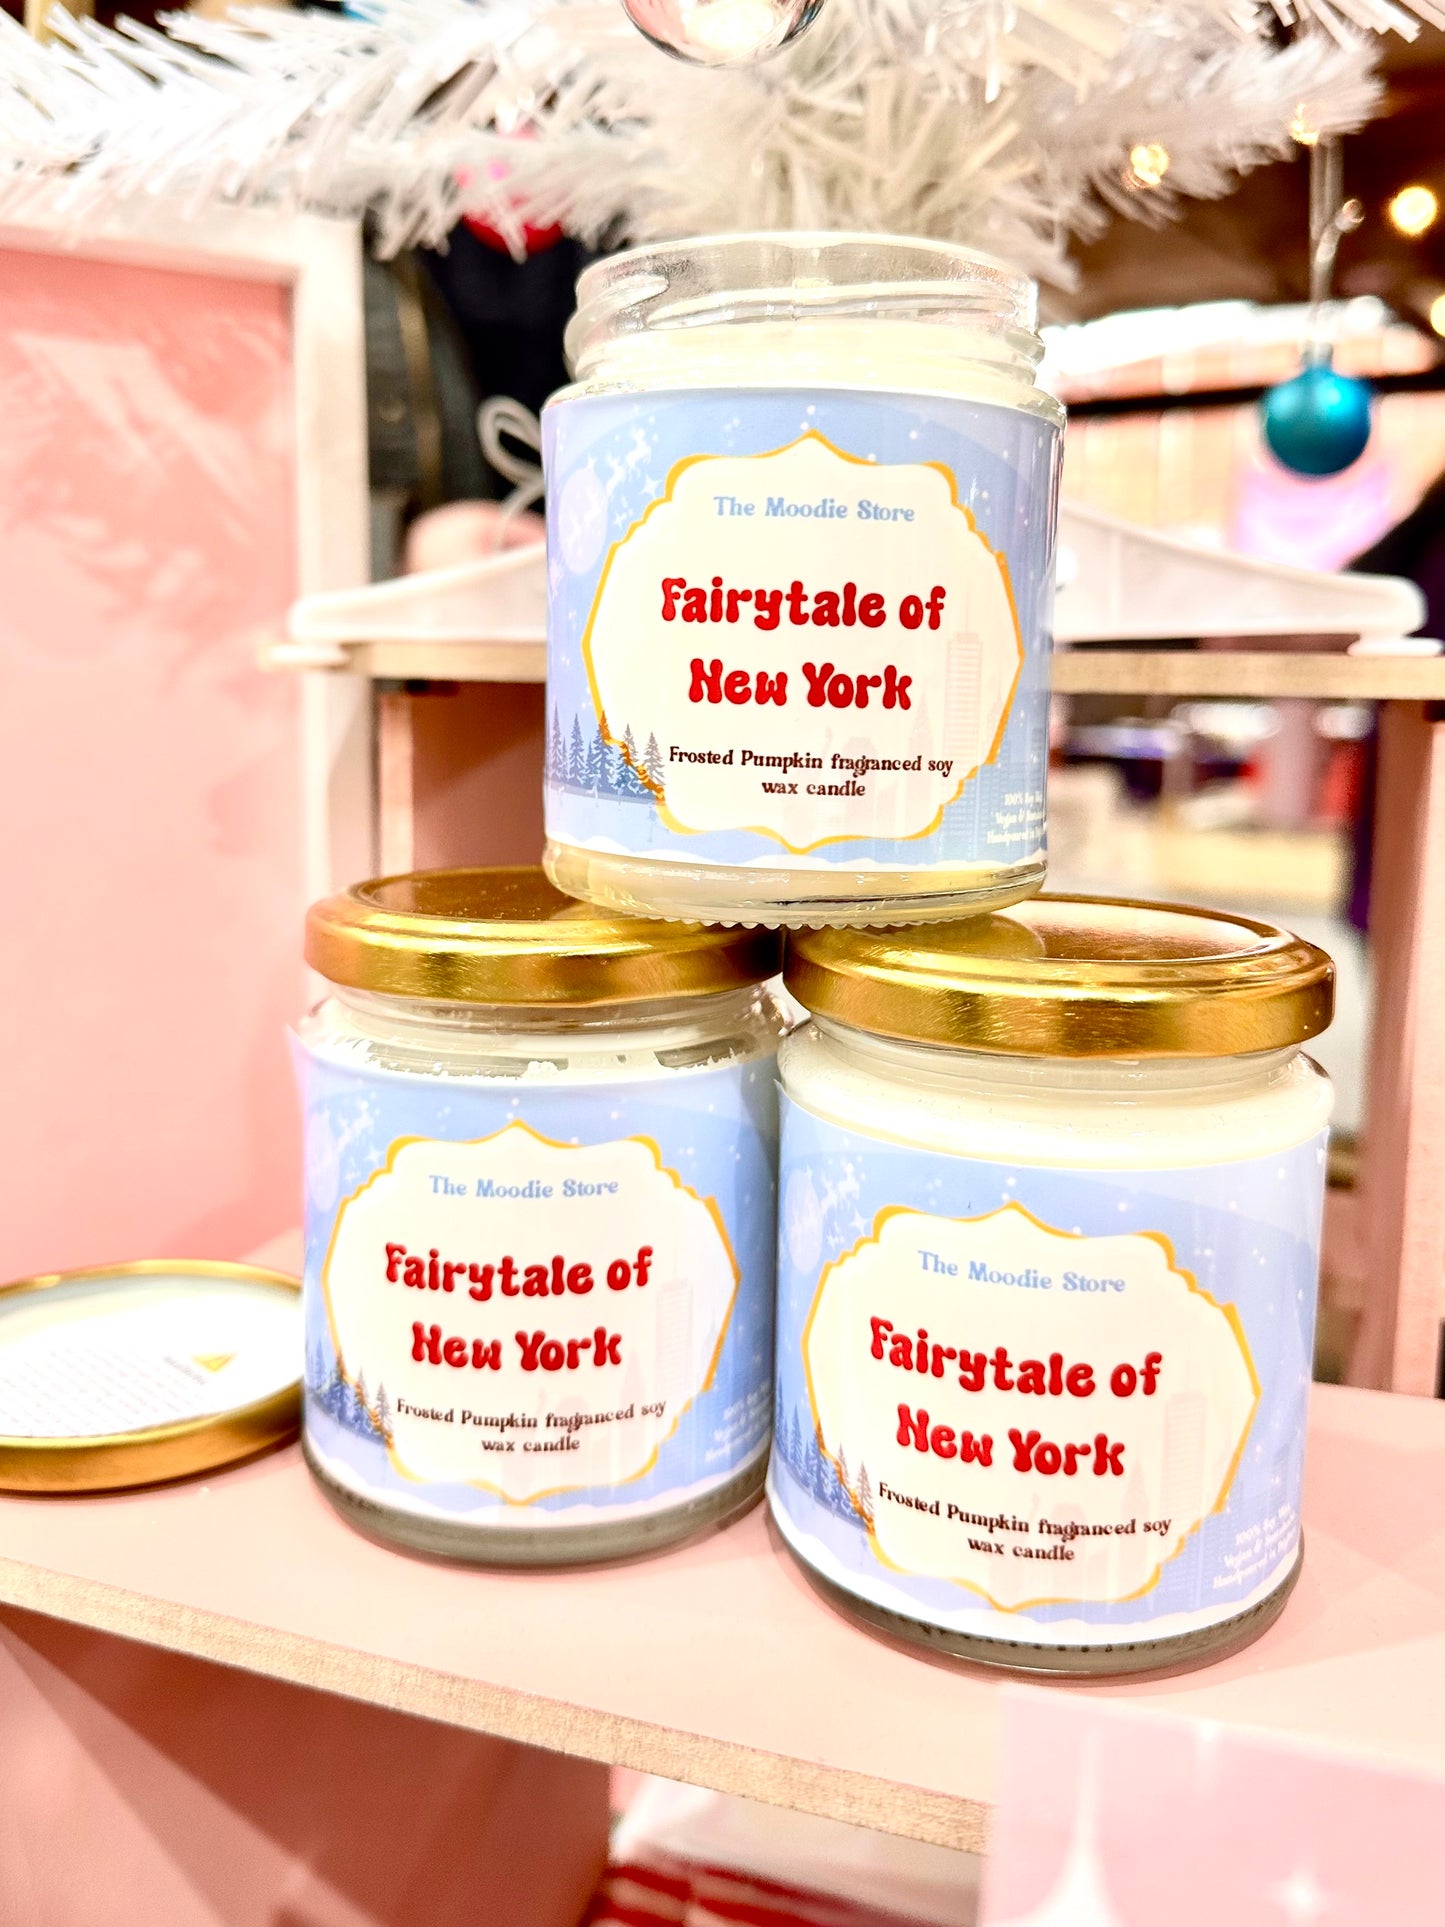 Fairytale of New York Soy Wax Jar candle - Frosted Pumpkin